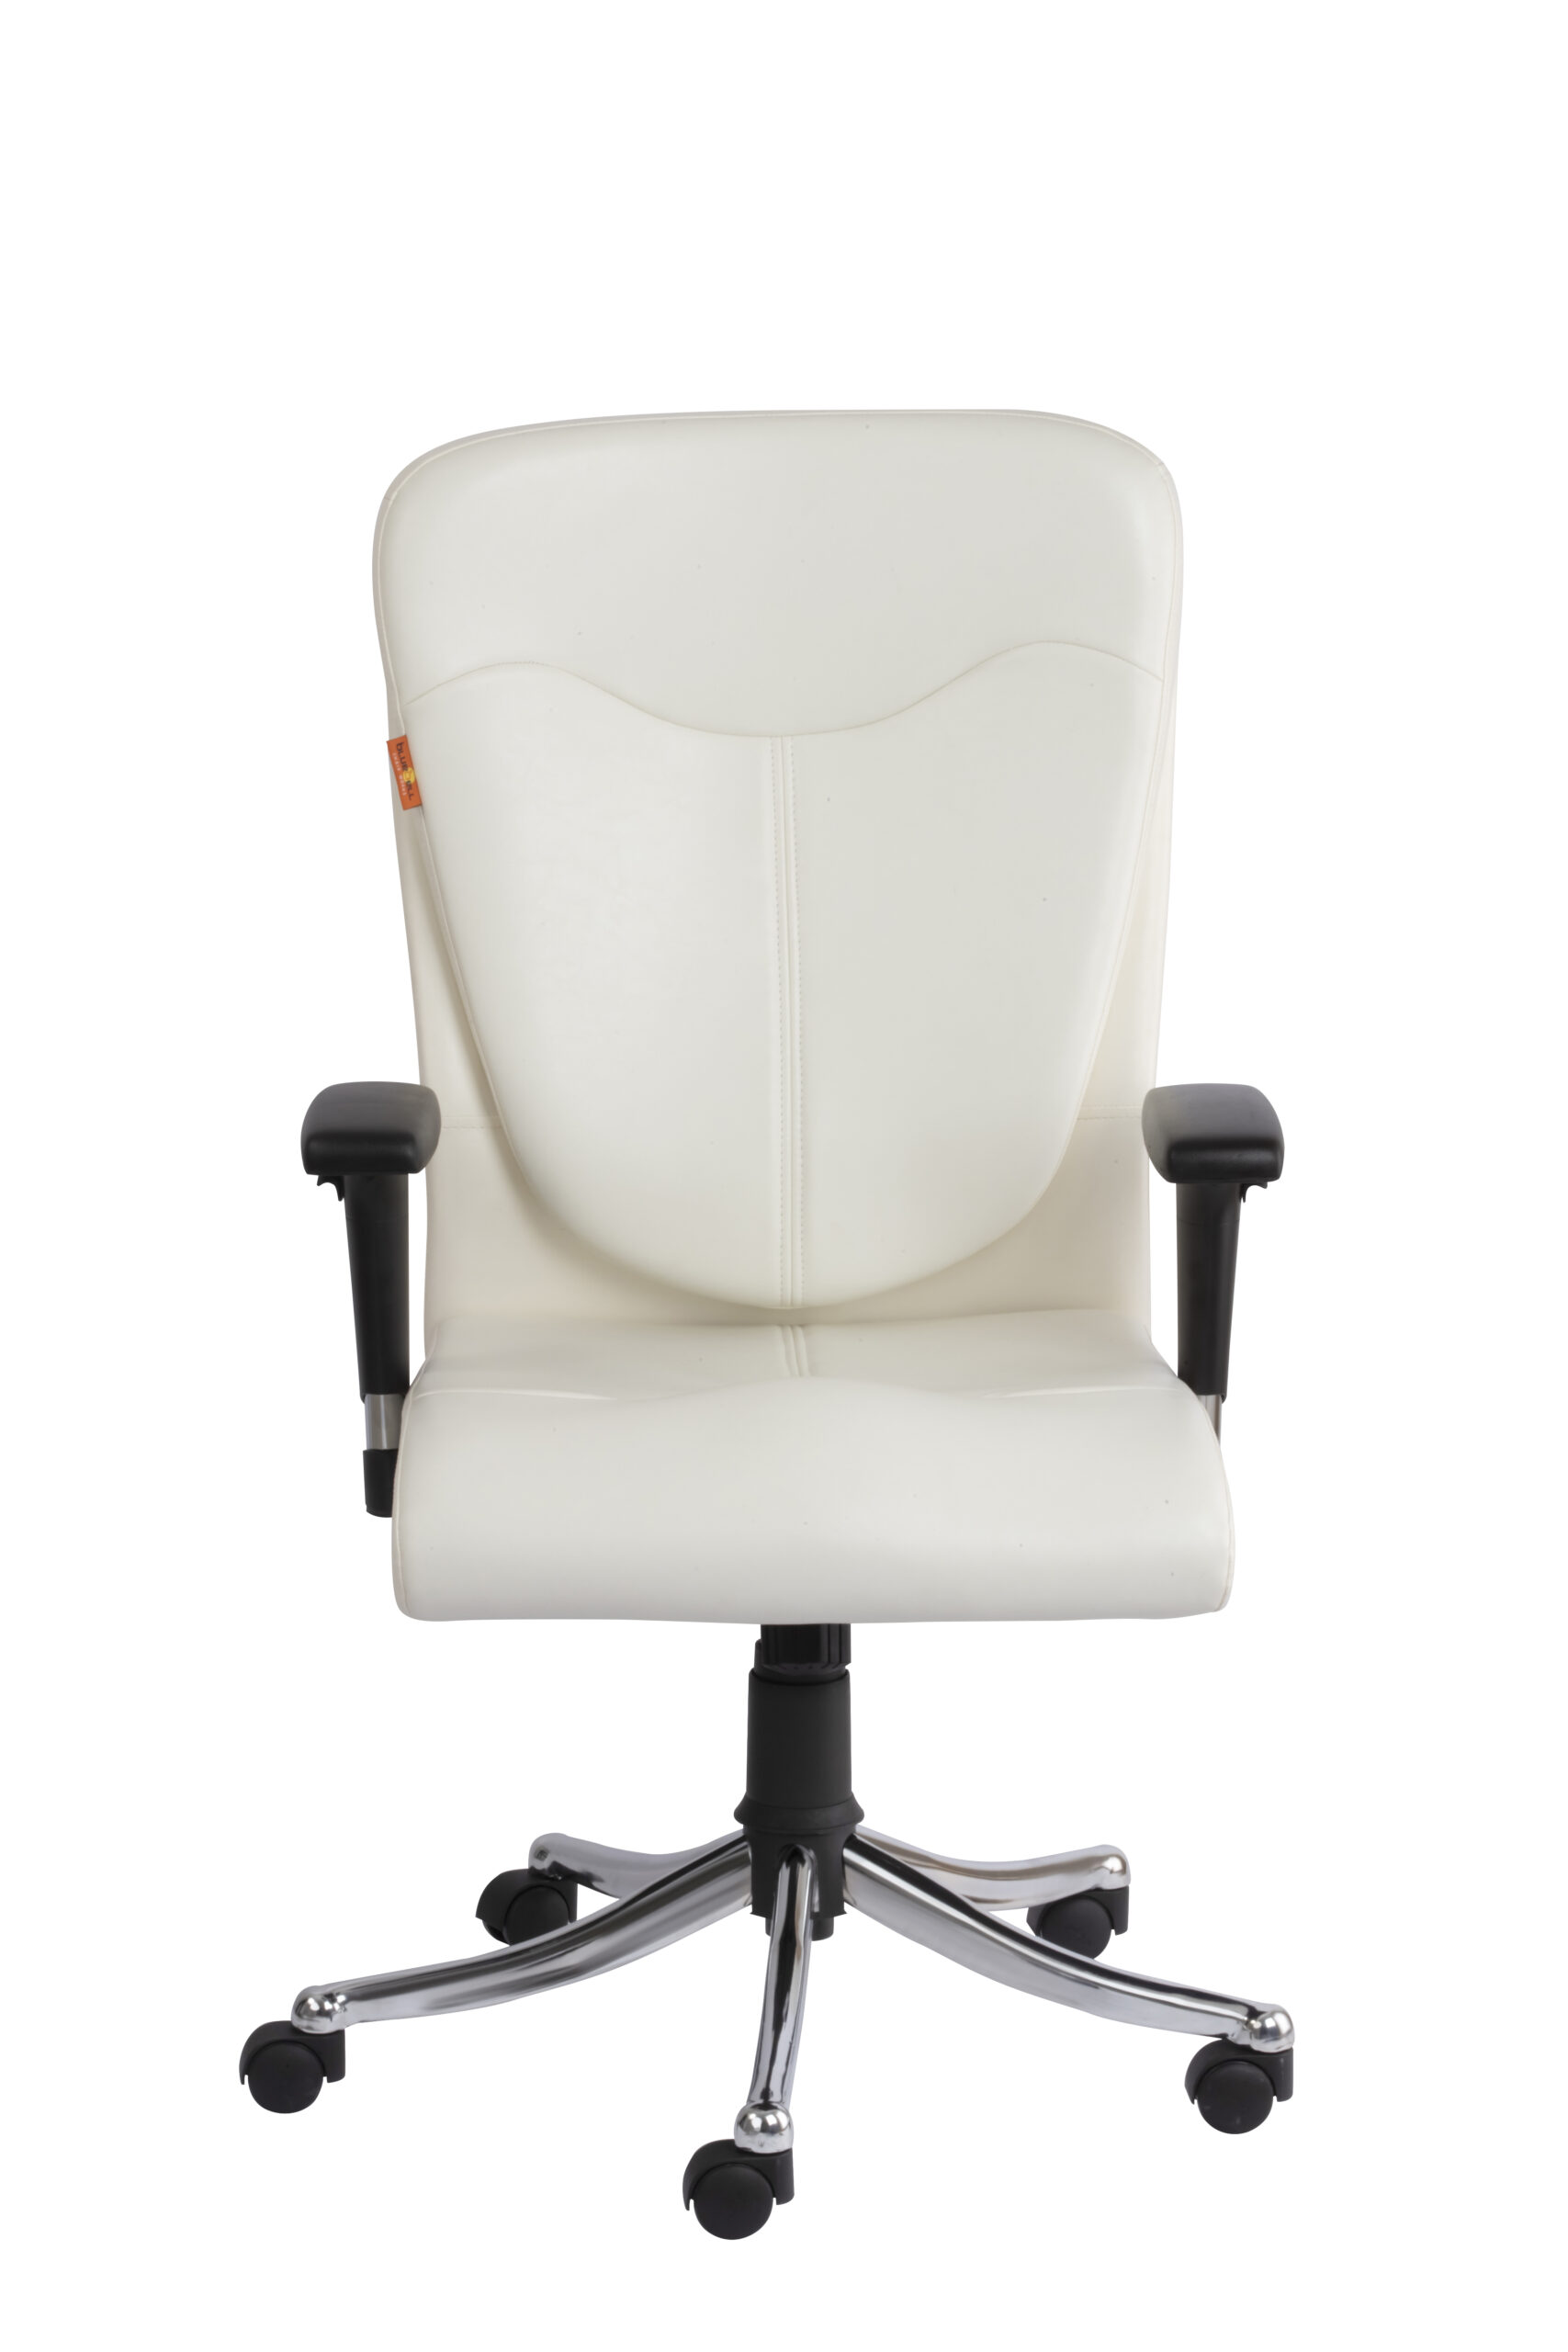 Proactive High Back Revolving Chair (Premium) - Modern Executive Office Chair with swivel function and tilting tension adjustment.